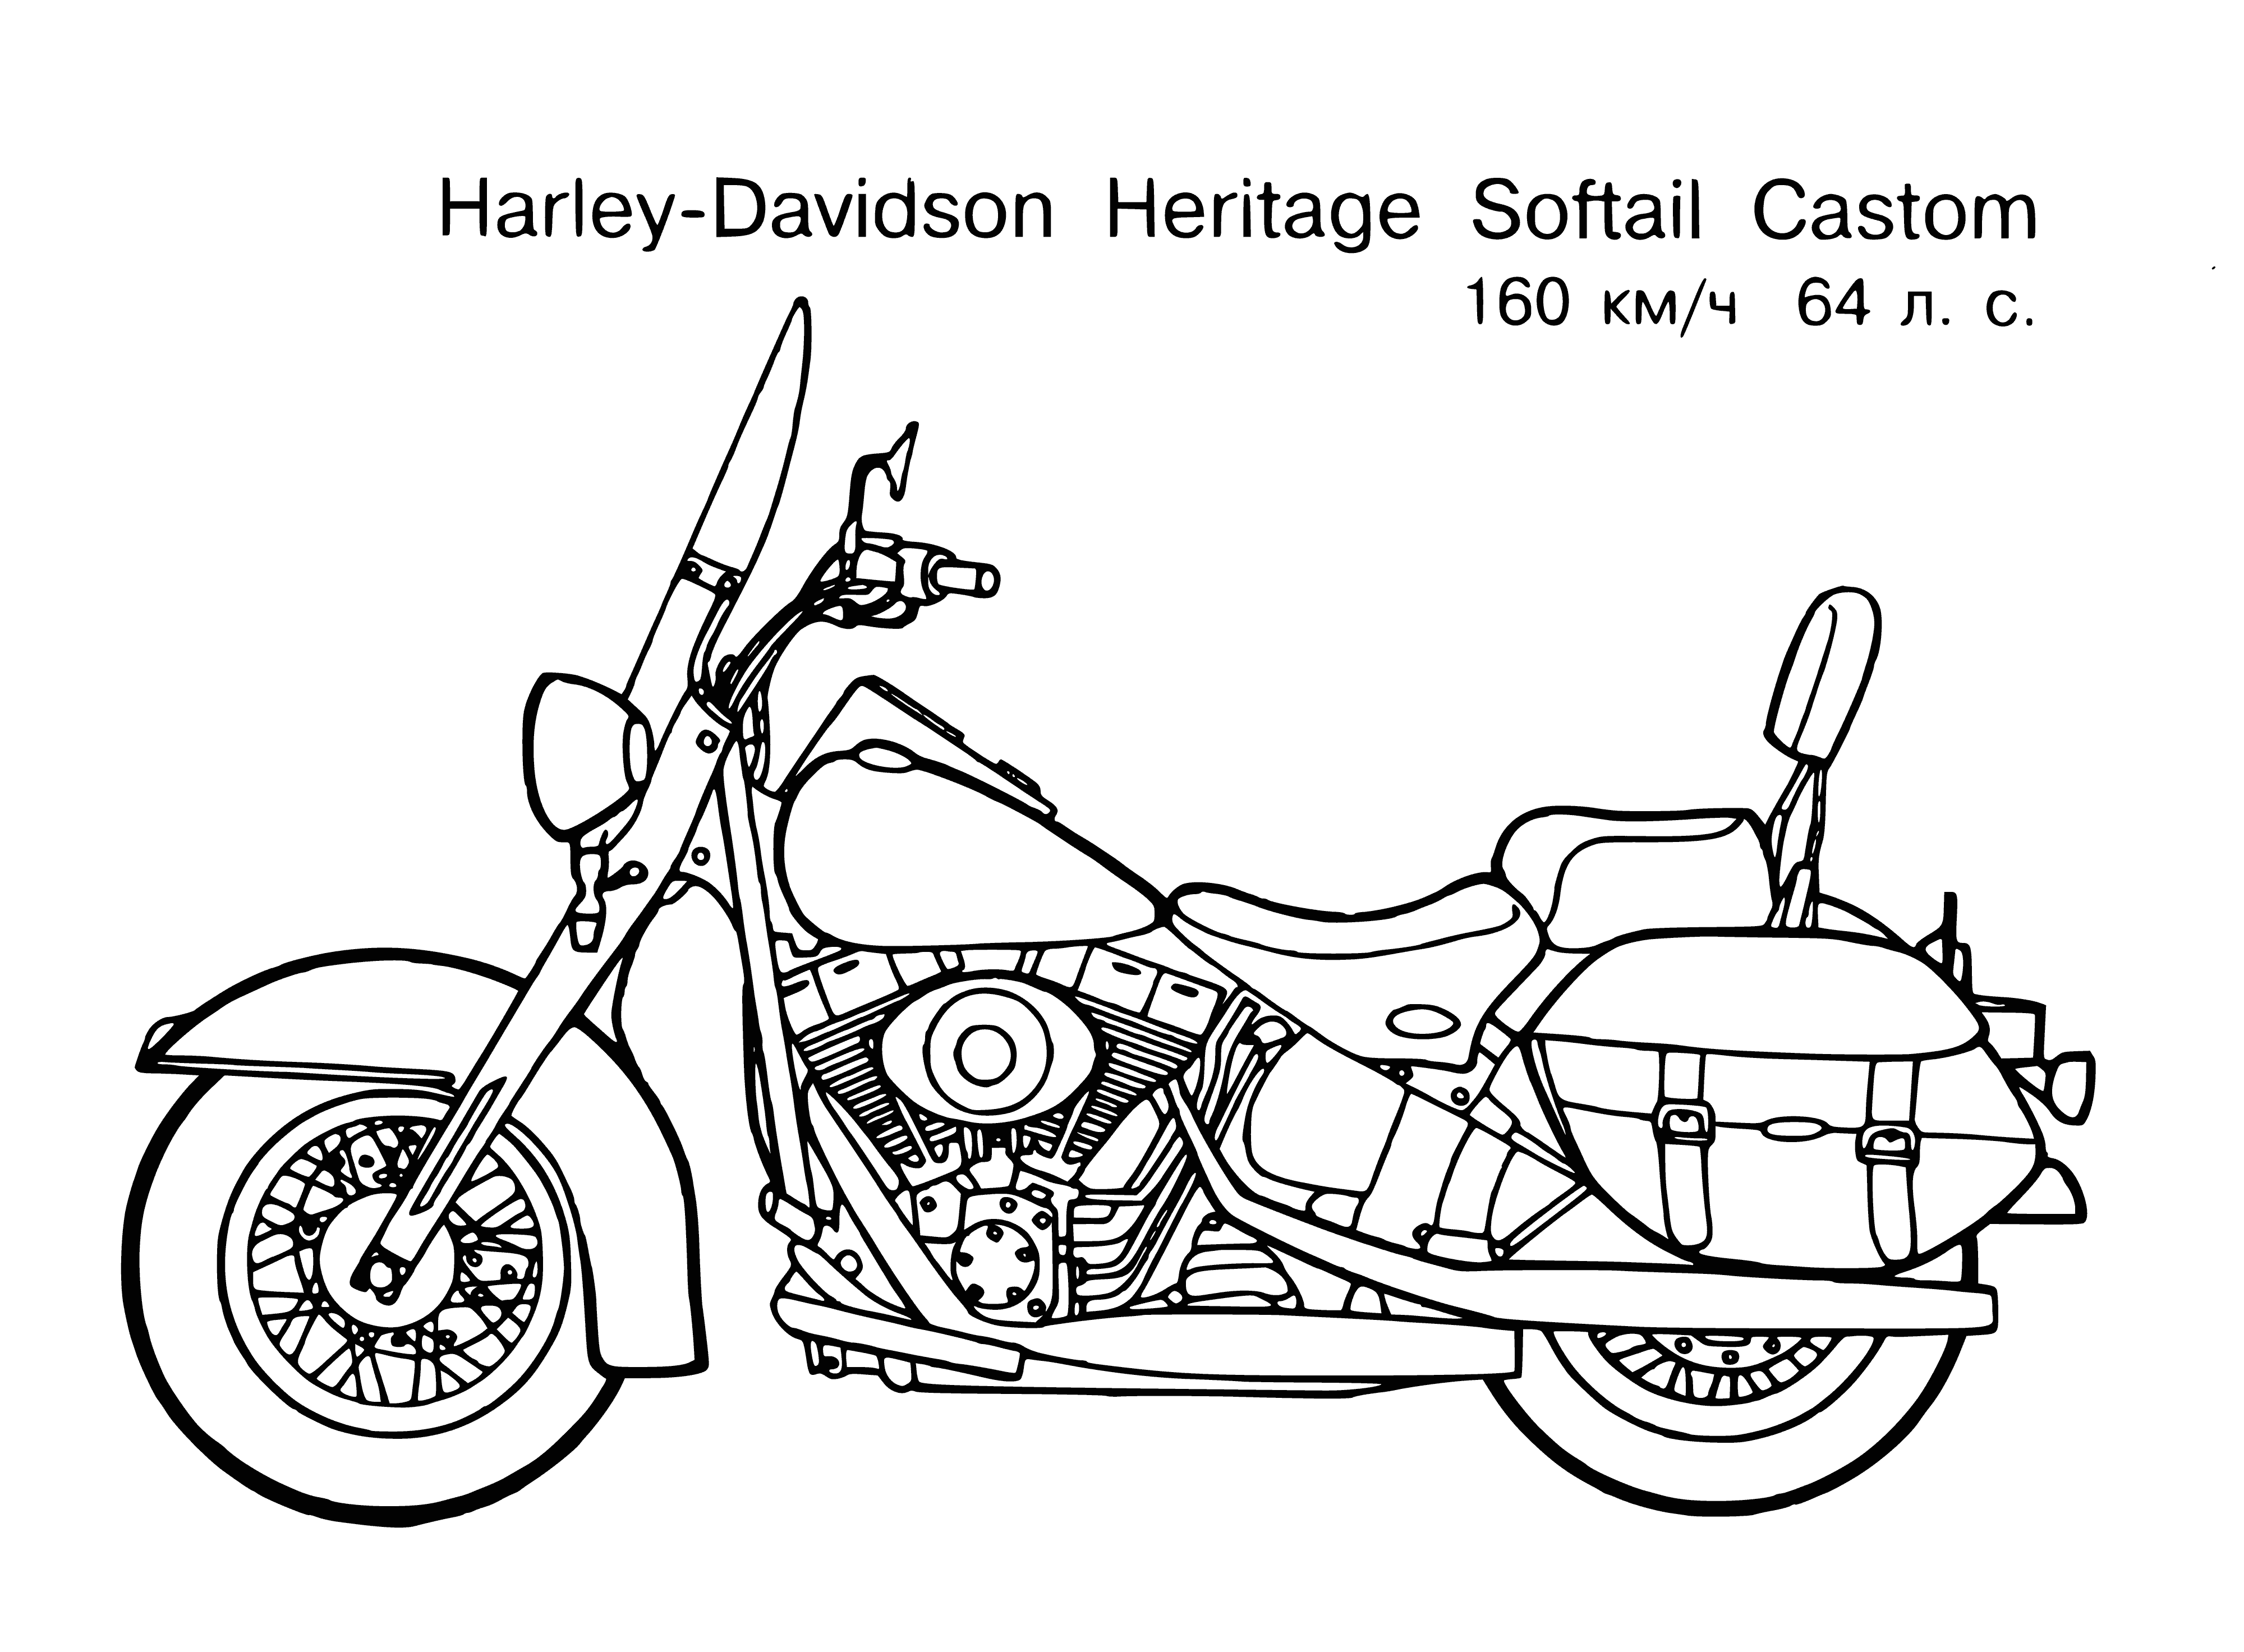 coloring page: Person riding motorbike on path by water wearing black helmet & jacket.